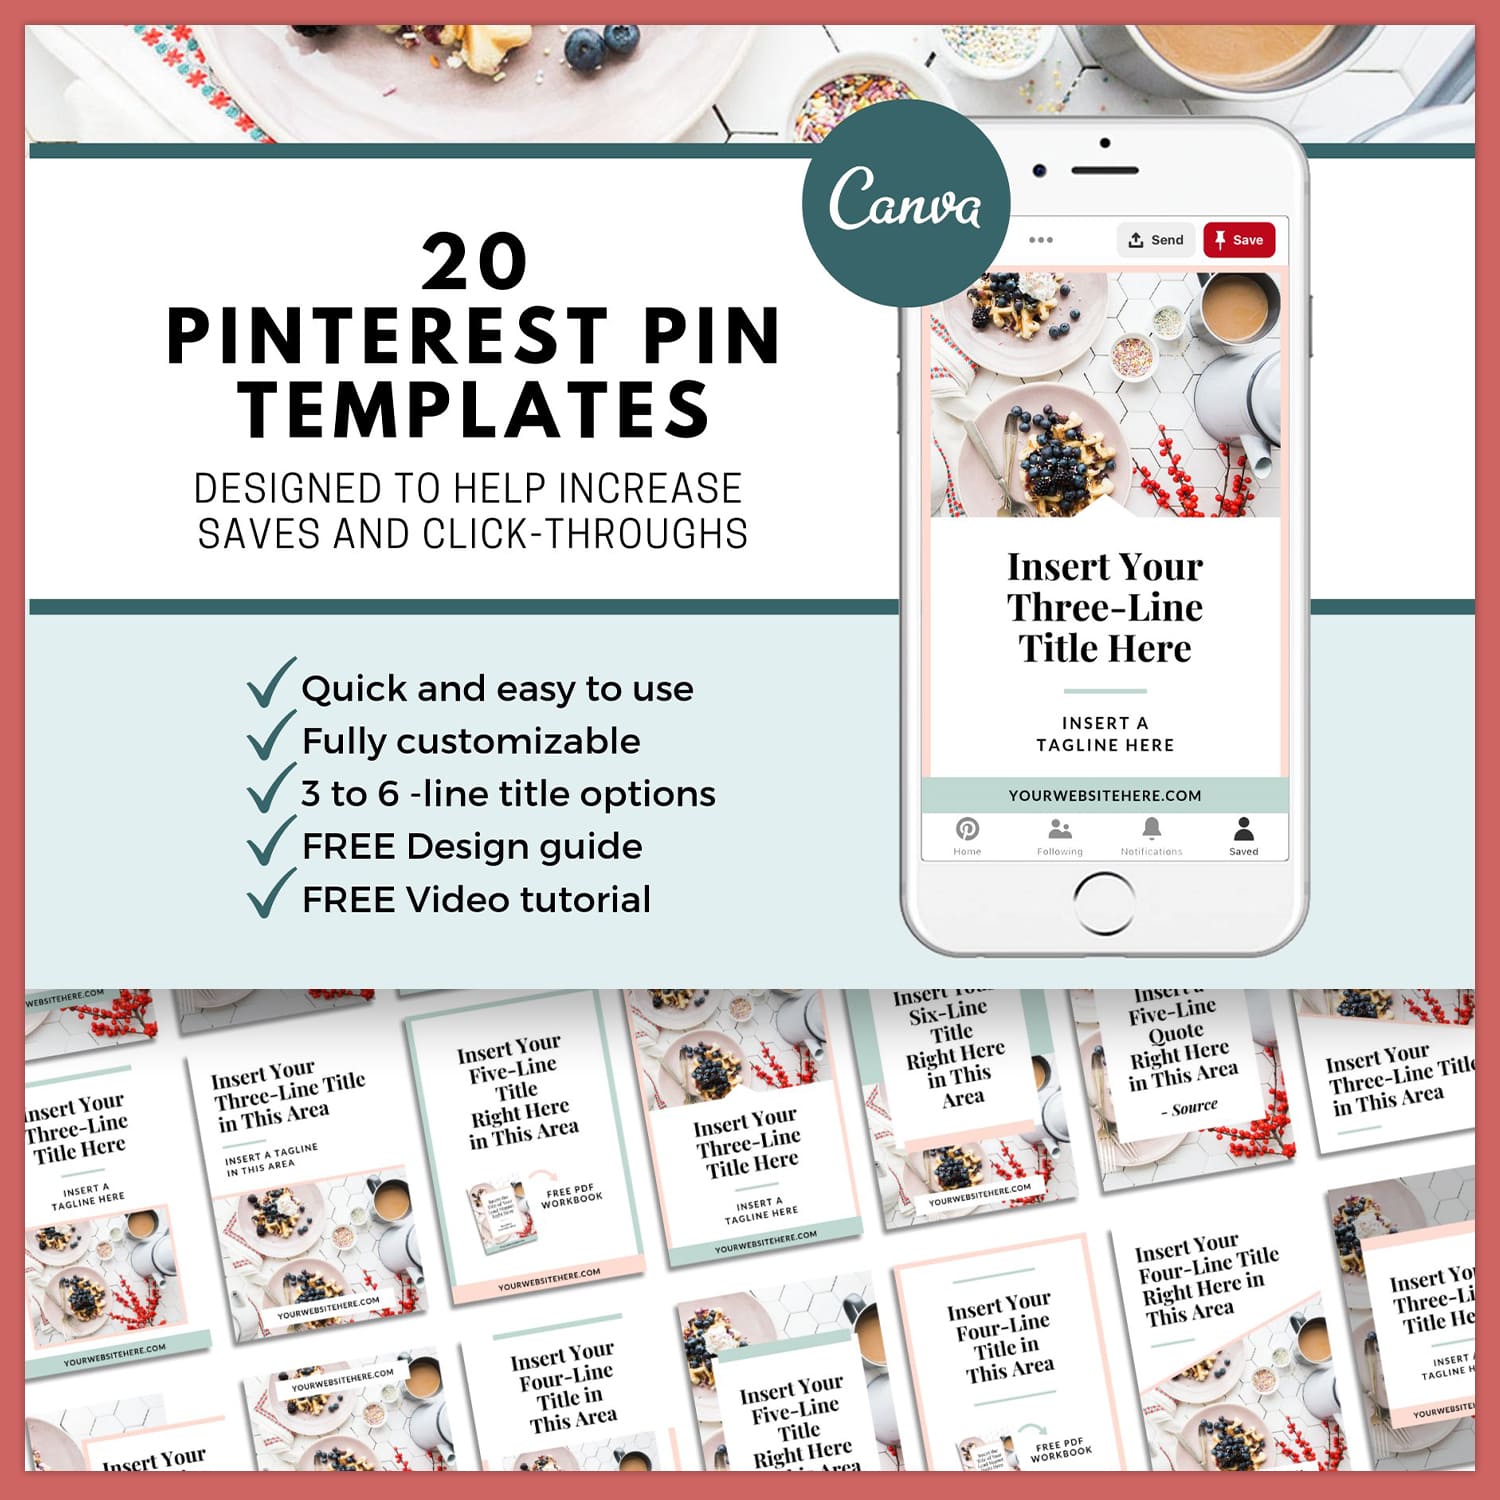 Pinterest Pin Template Canva cover image.